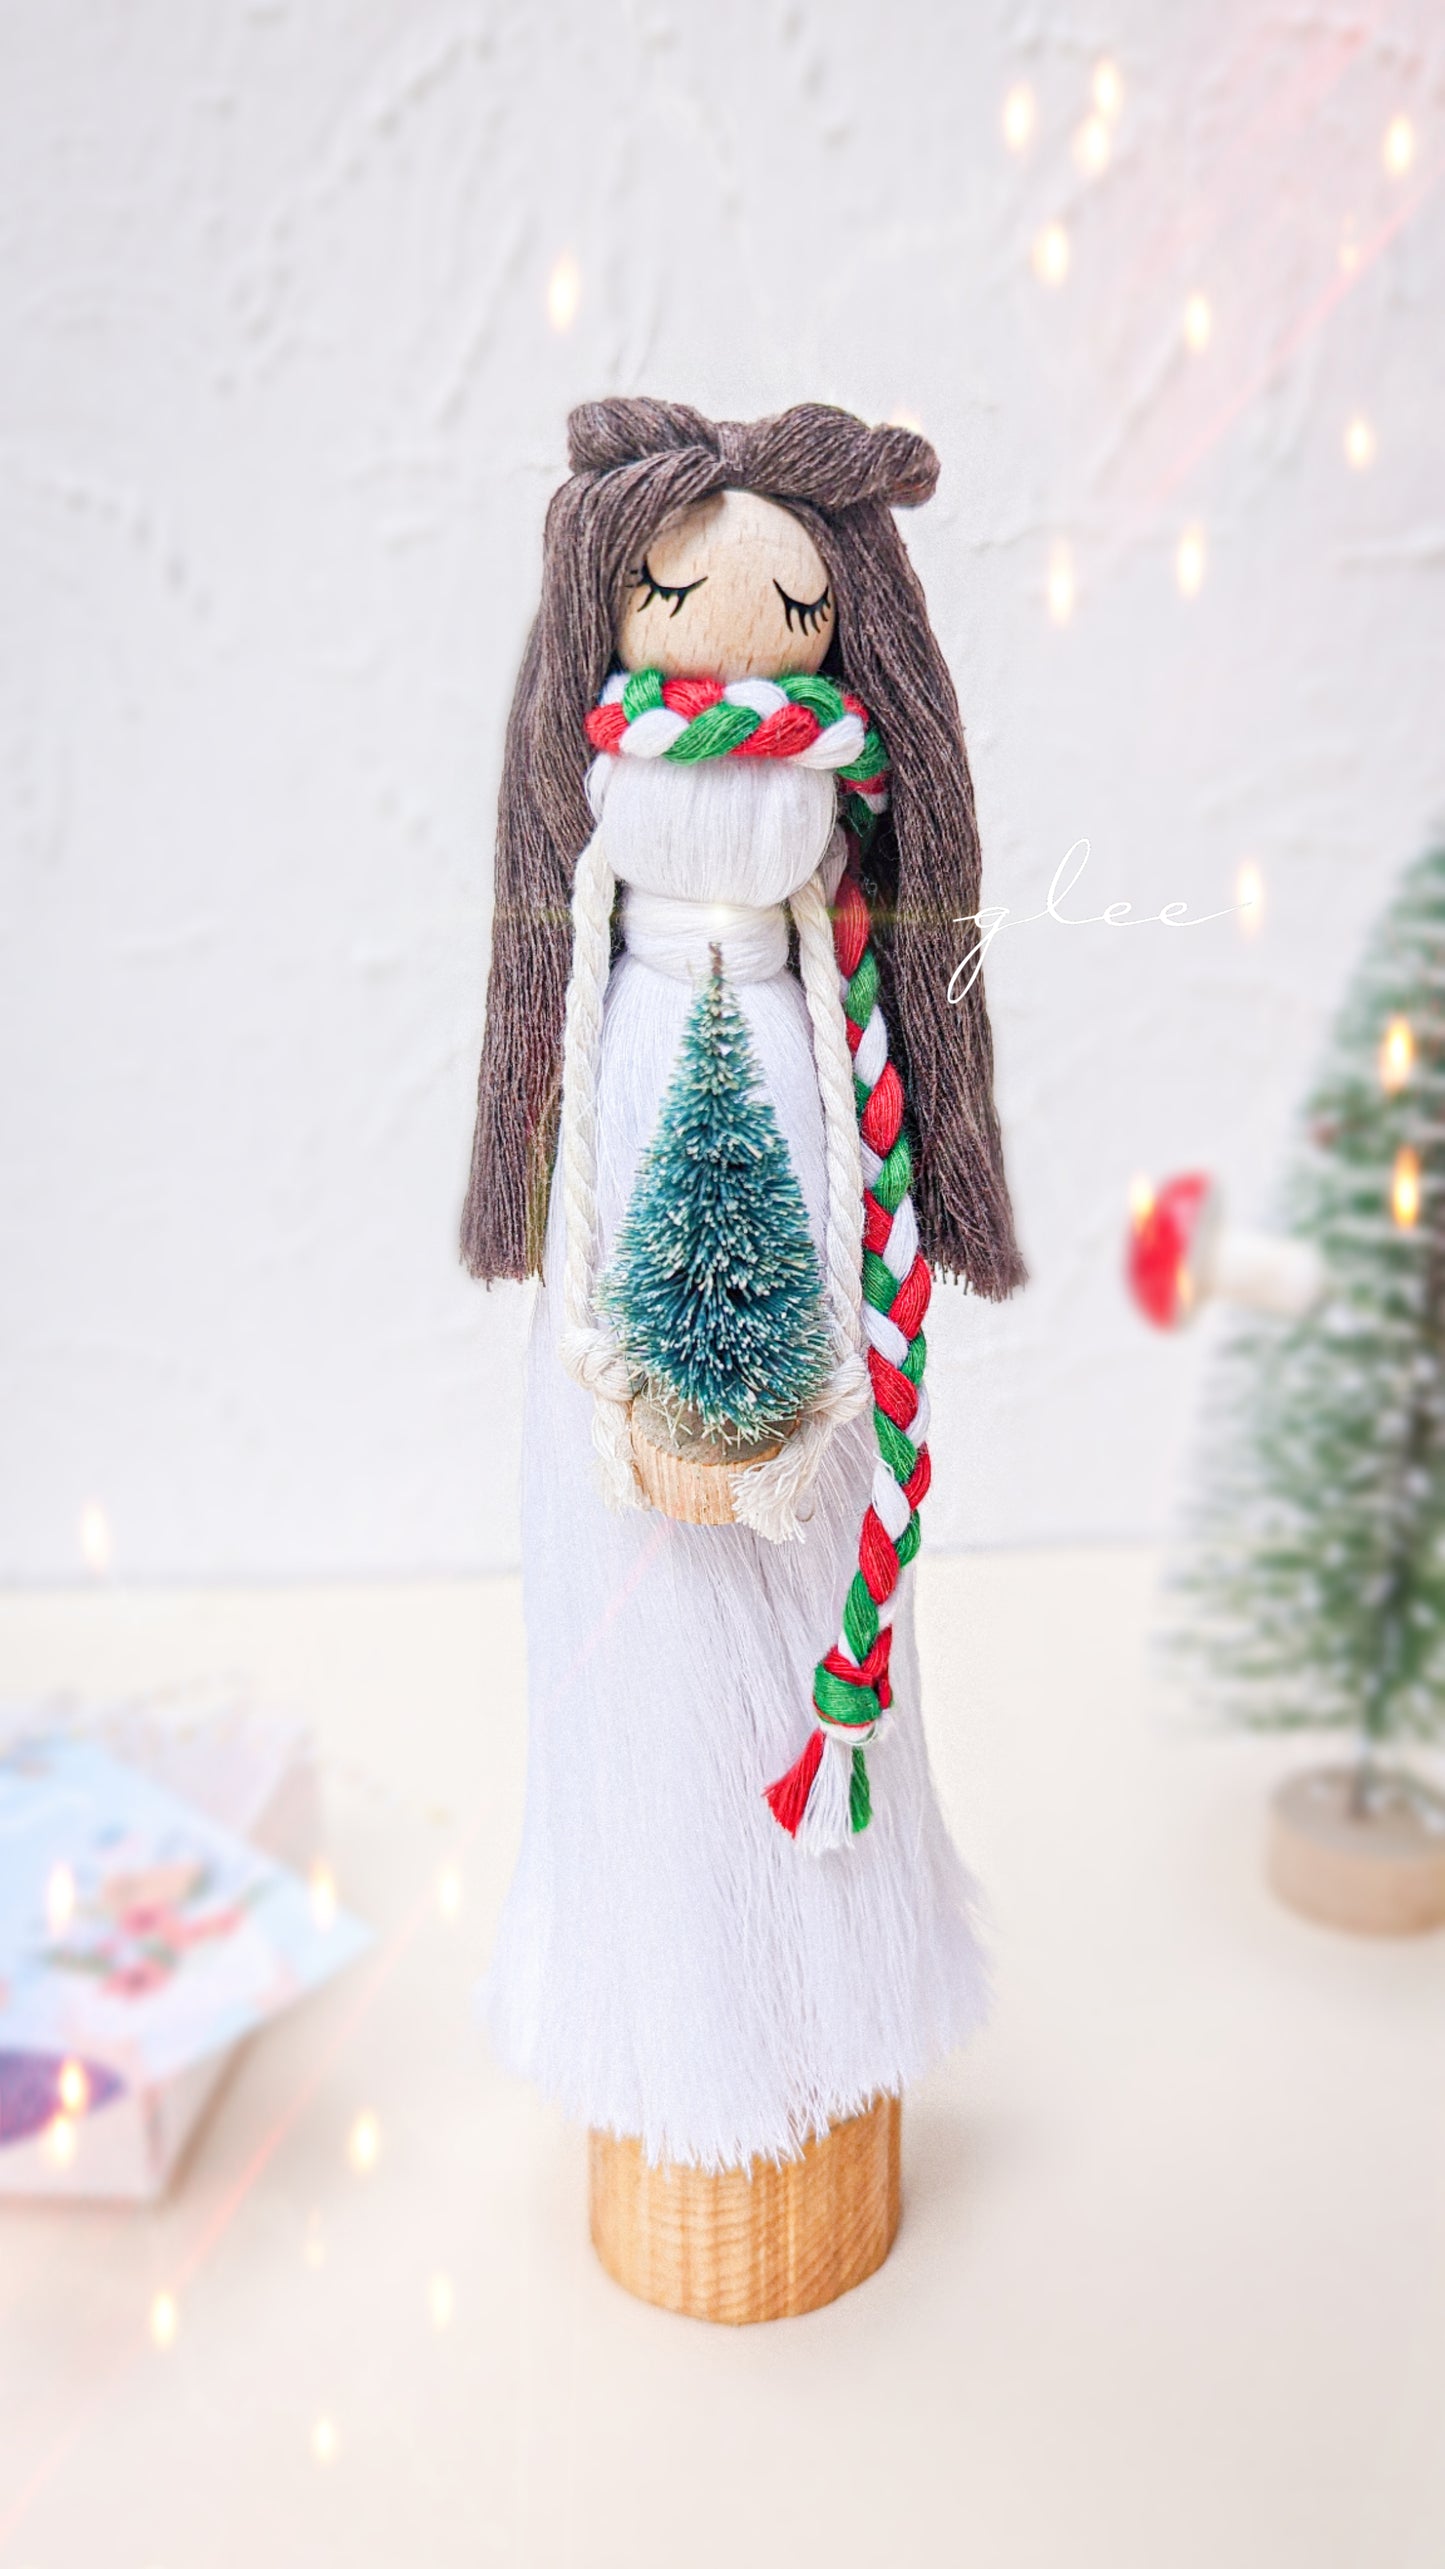 The Christmas Doll with a stand